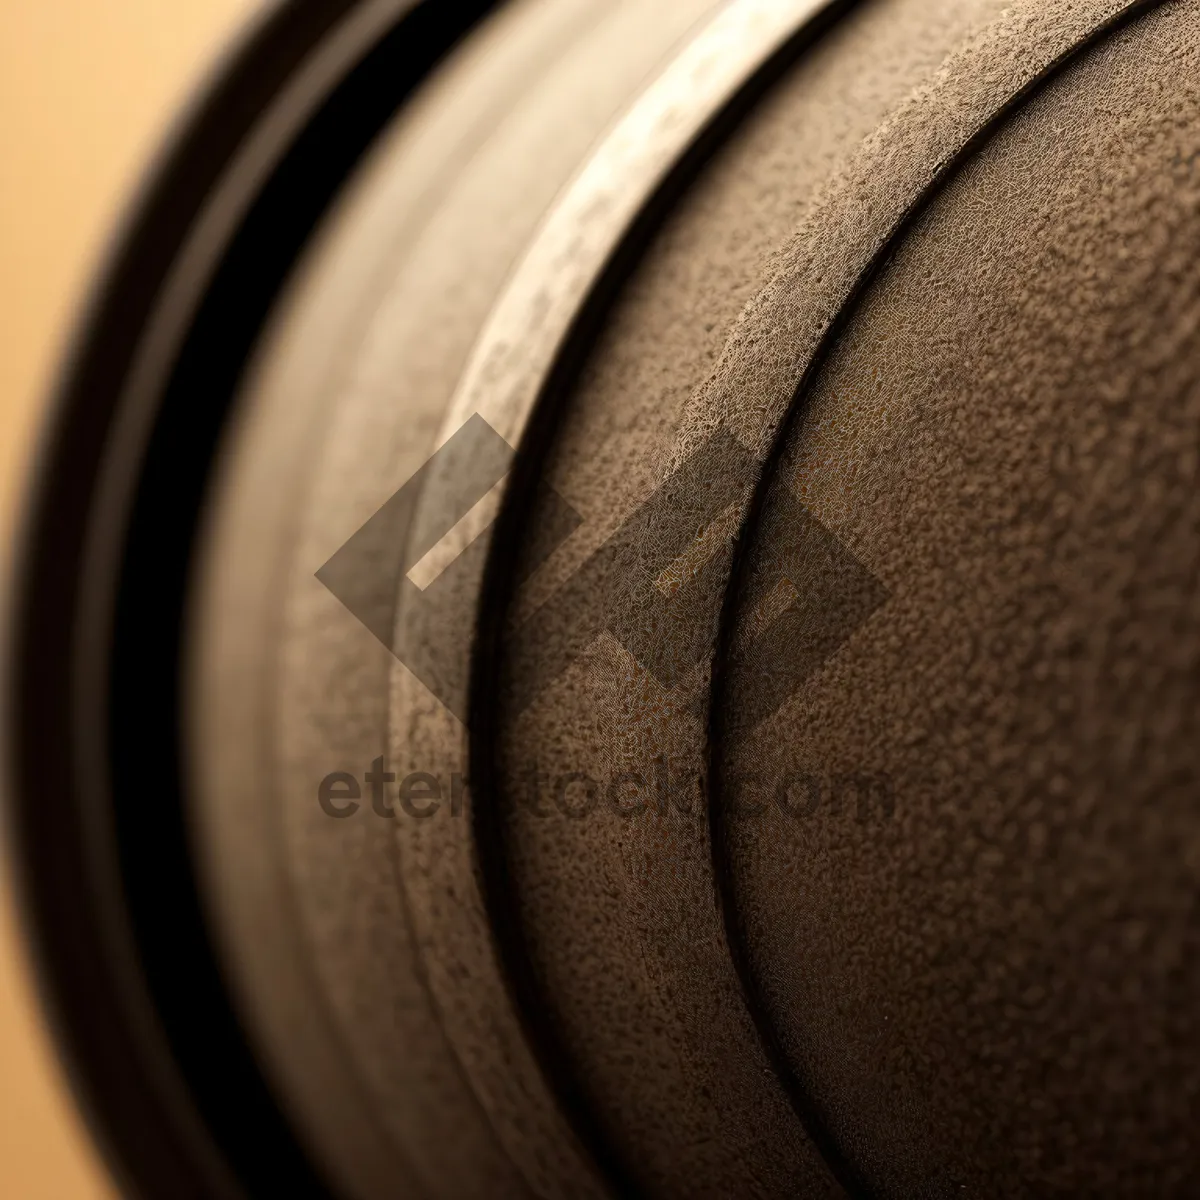 Picture of Music Equipment Close-Up: Basketball Speaker with Black Lens